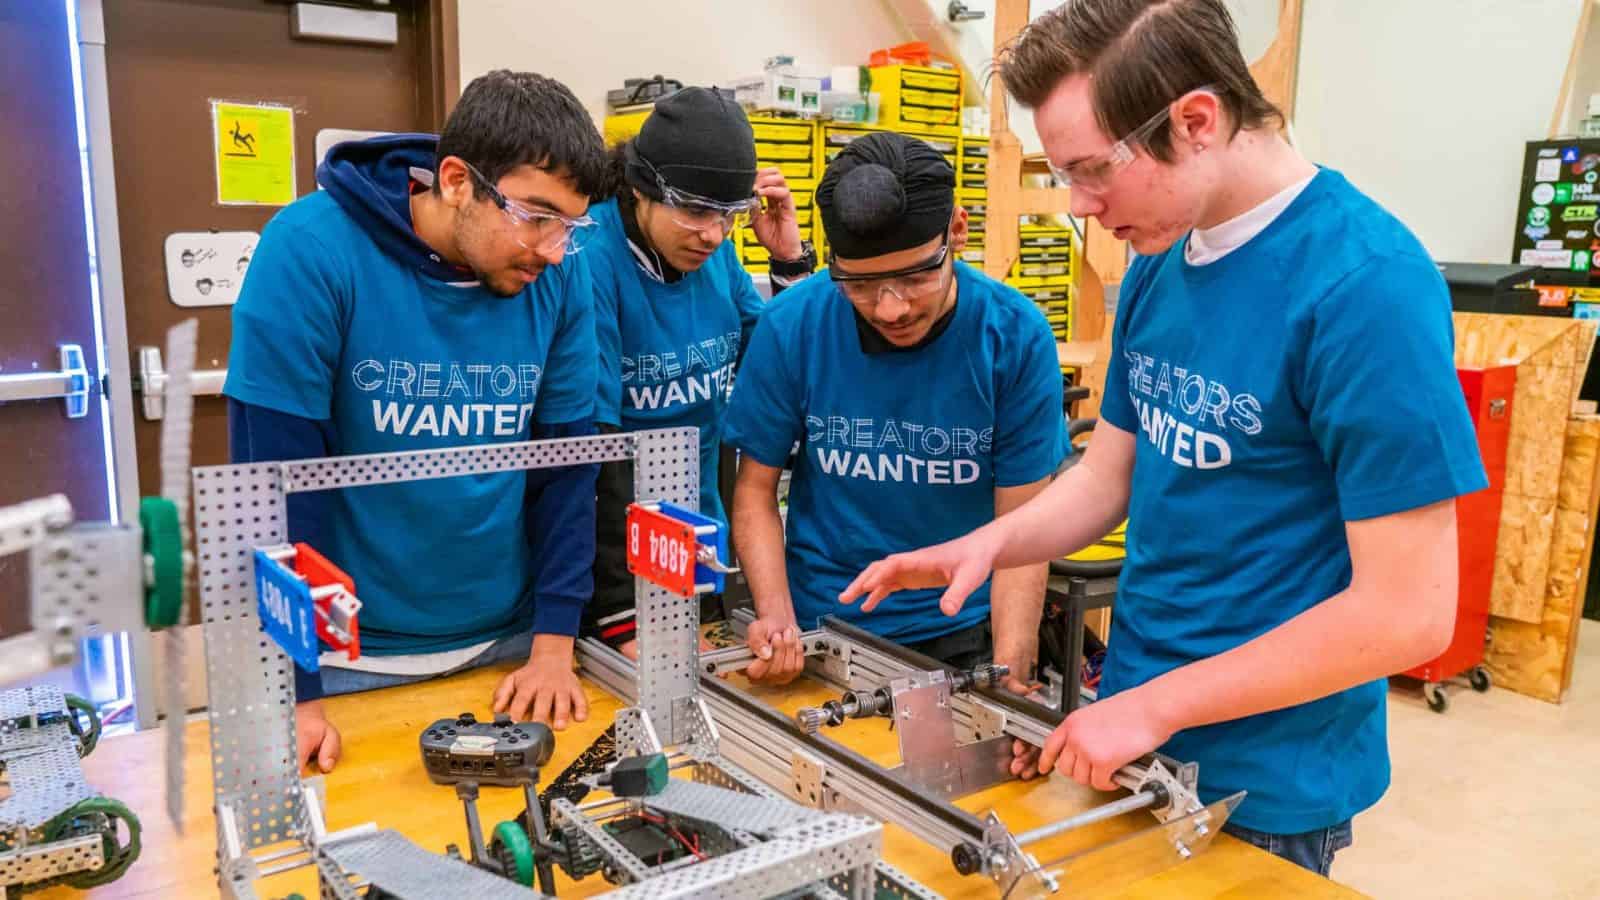 Students work on a manufacturing project while wearing Creators Wanted t-shirts